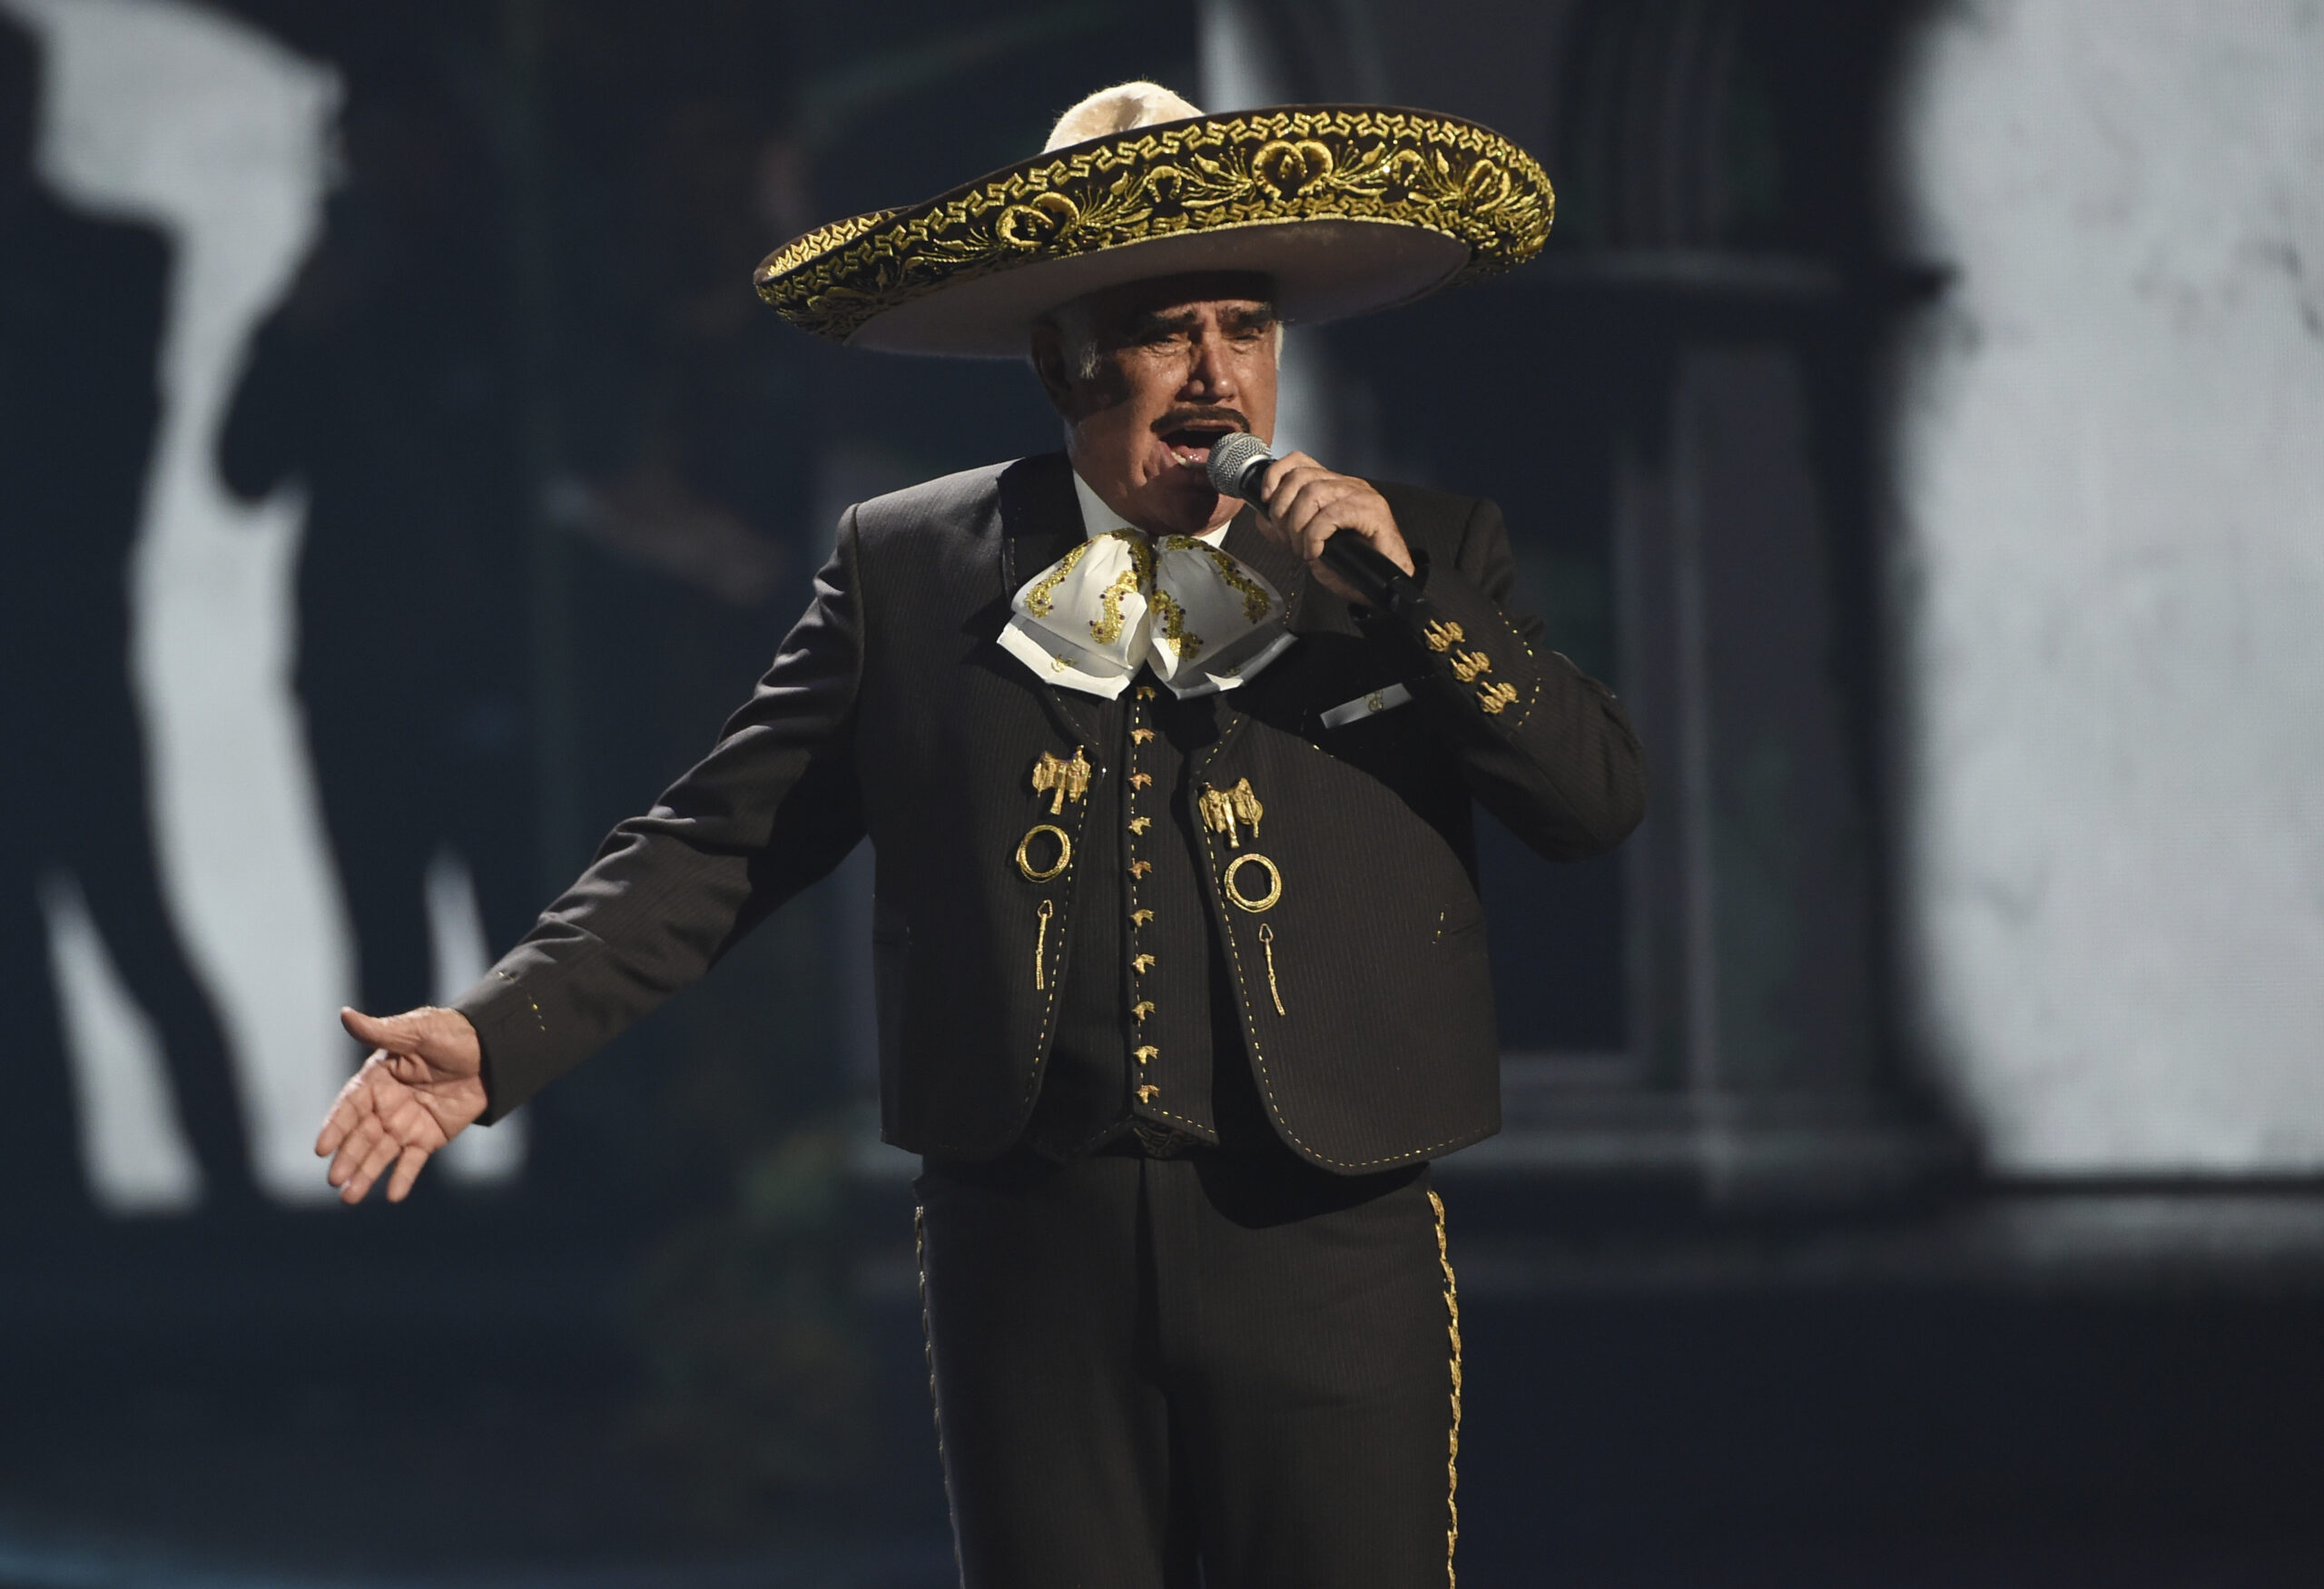 FILE - Vicente Fernandez performs at the 20th Latin Grammy Awards on Nov. 14, 2019, in Las Vegas. The Mexican singer died early Sunday, Dec. 12, 2021, relatives reported. He was 81 years old. (AP Photo/Chris Pizzello, File)